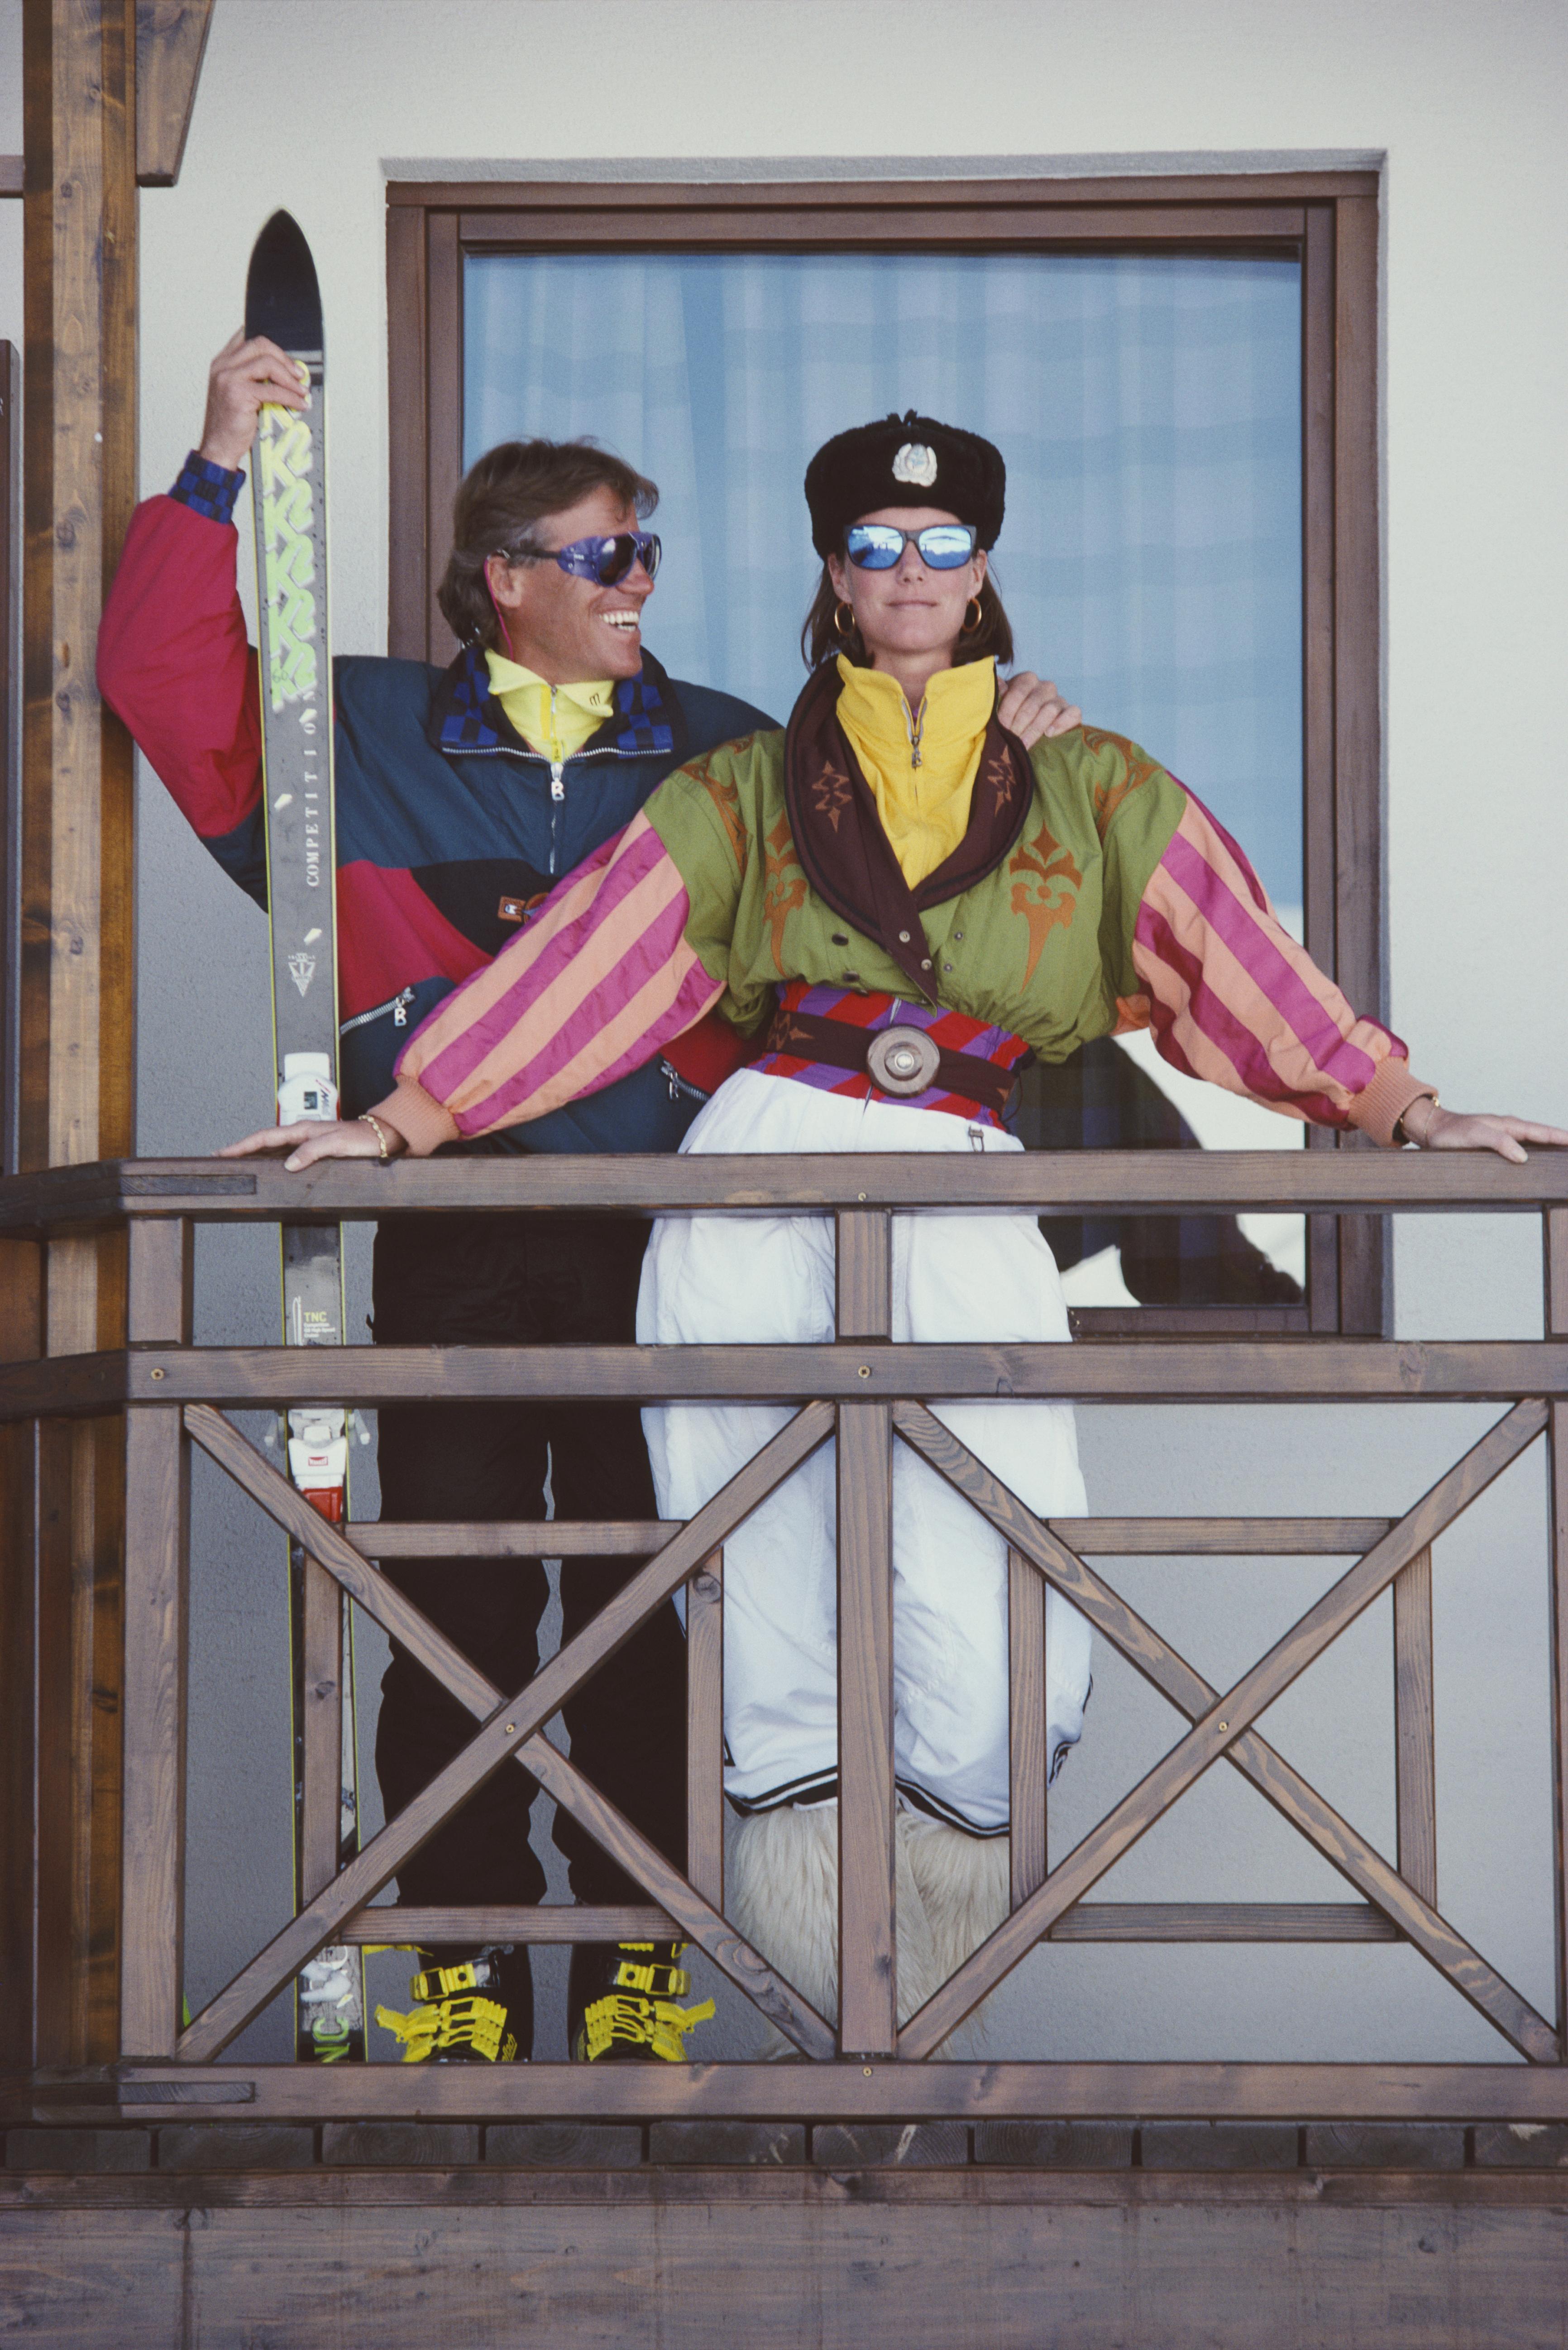 'You Look Wonderful' 1990 Slim Aarons Limited Estate Edition Print 

1990: Alpine ski champion Max Rieger on the balcony of a villa in Gudari, in the Caucasus mountains,Georgia. With him is Meg O'Neil dressed in ski suit designed by Bogner and